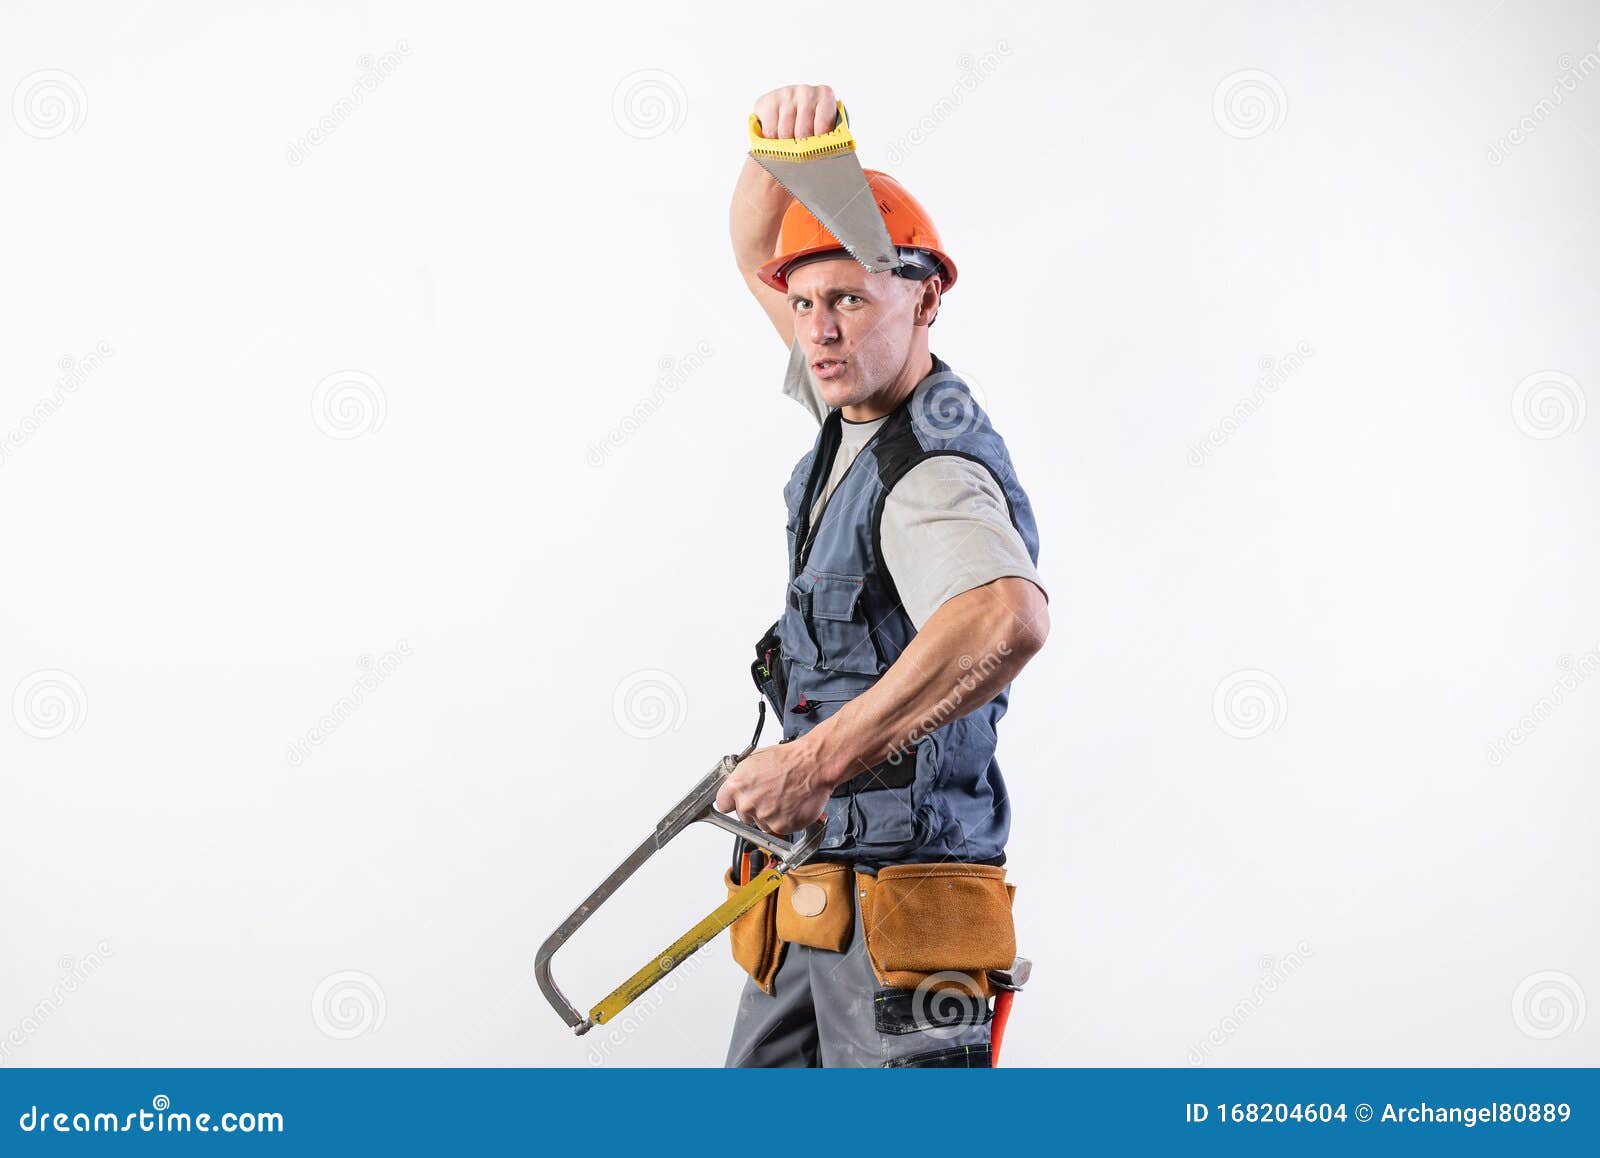 a builder with hacksaws in a helmet mocks. on a light background